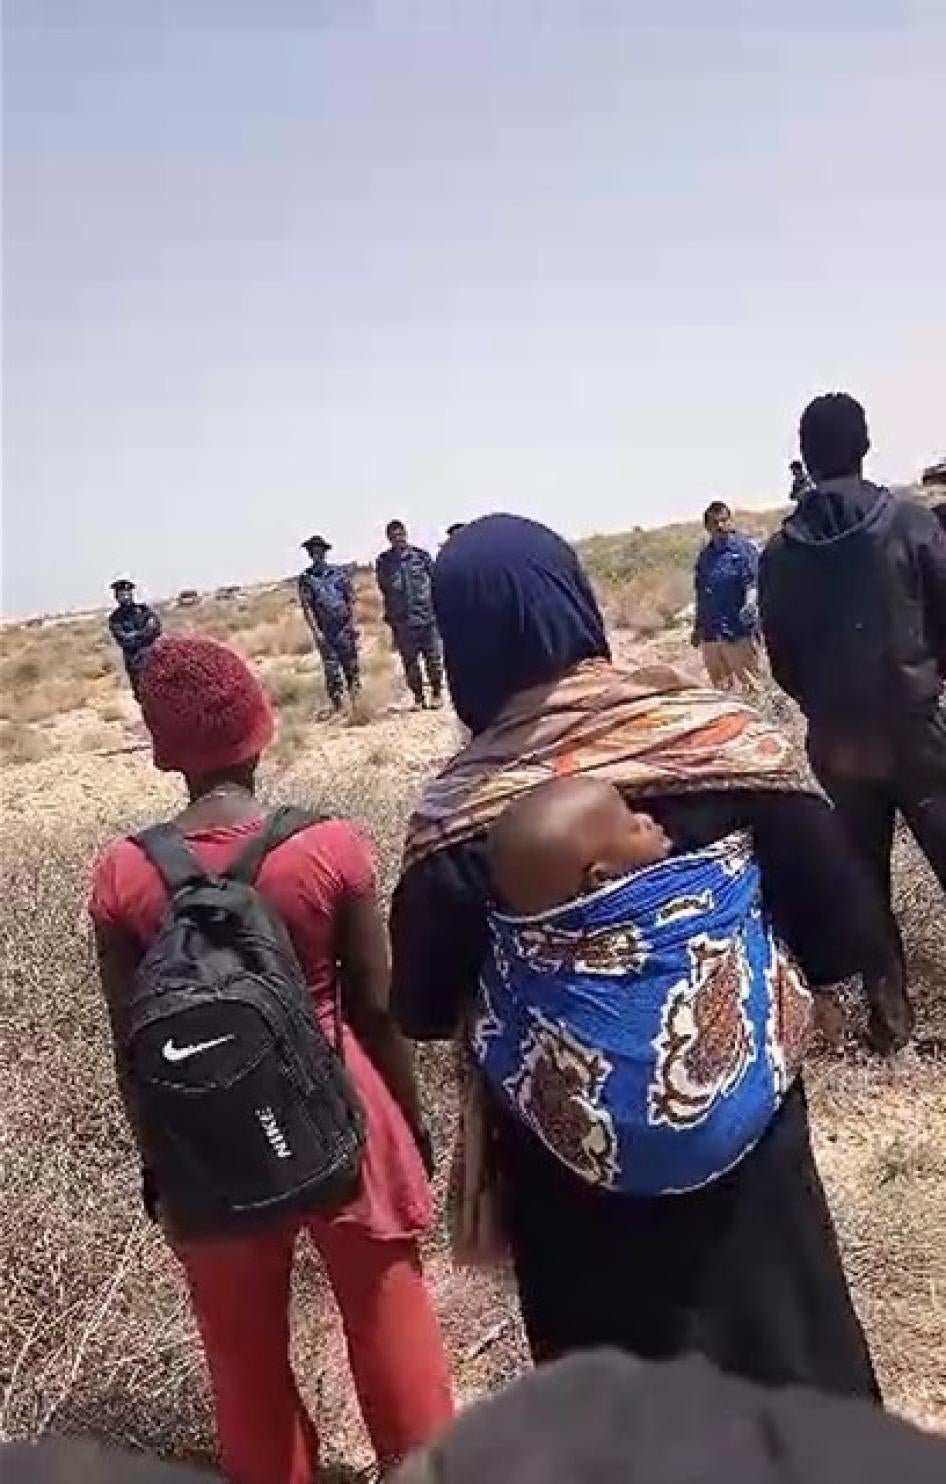 A group of Black migrants and asylum seekers of multiple African nationalities, including a woman and her baby, stranded in the desert for days after expulsion from Tunisia, stand in the buffer zone at the Tunisia-Libya border facing an Al Jazeera news crew and Libyan soldiers, July 11, 2023.  © 2023 Private